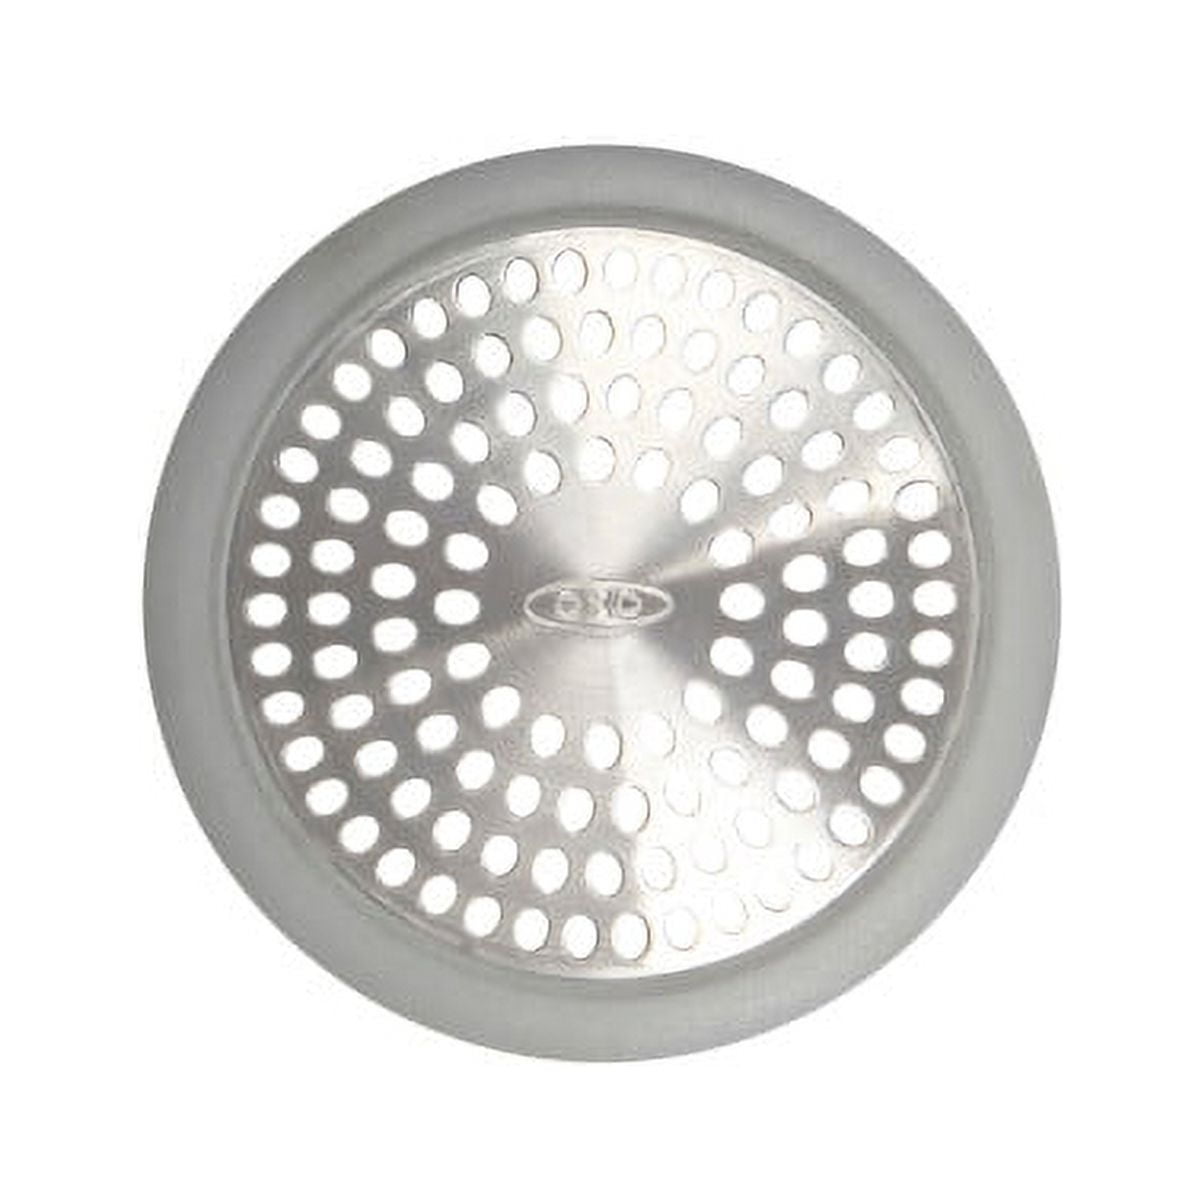 The Oxo Shower Protector Keeps My Shower Drain Clear: Review